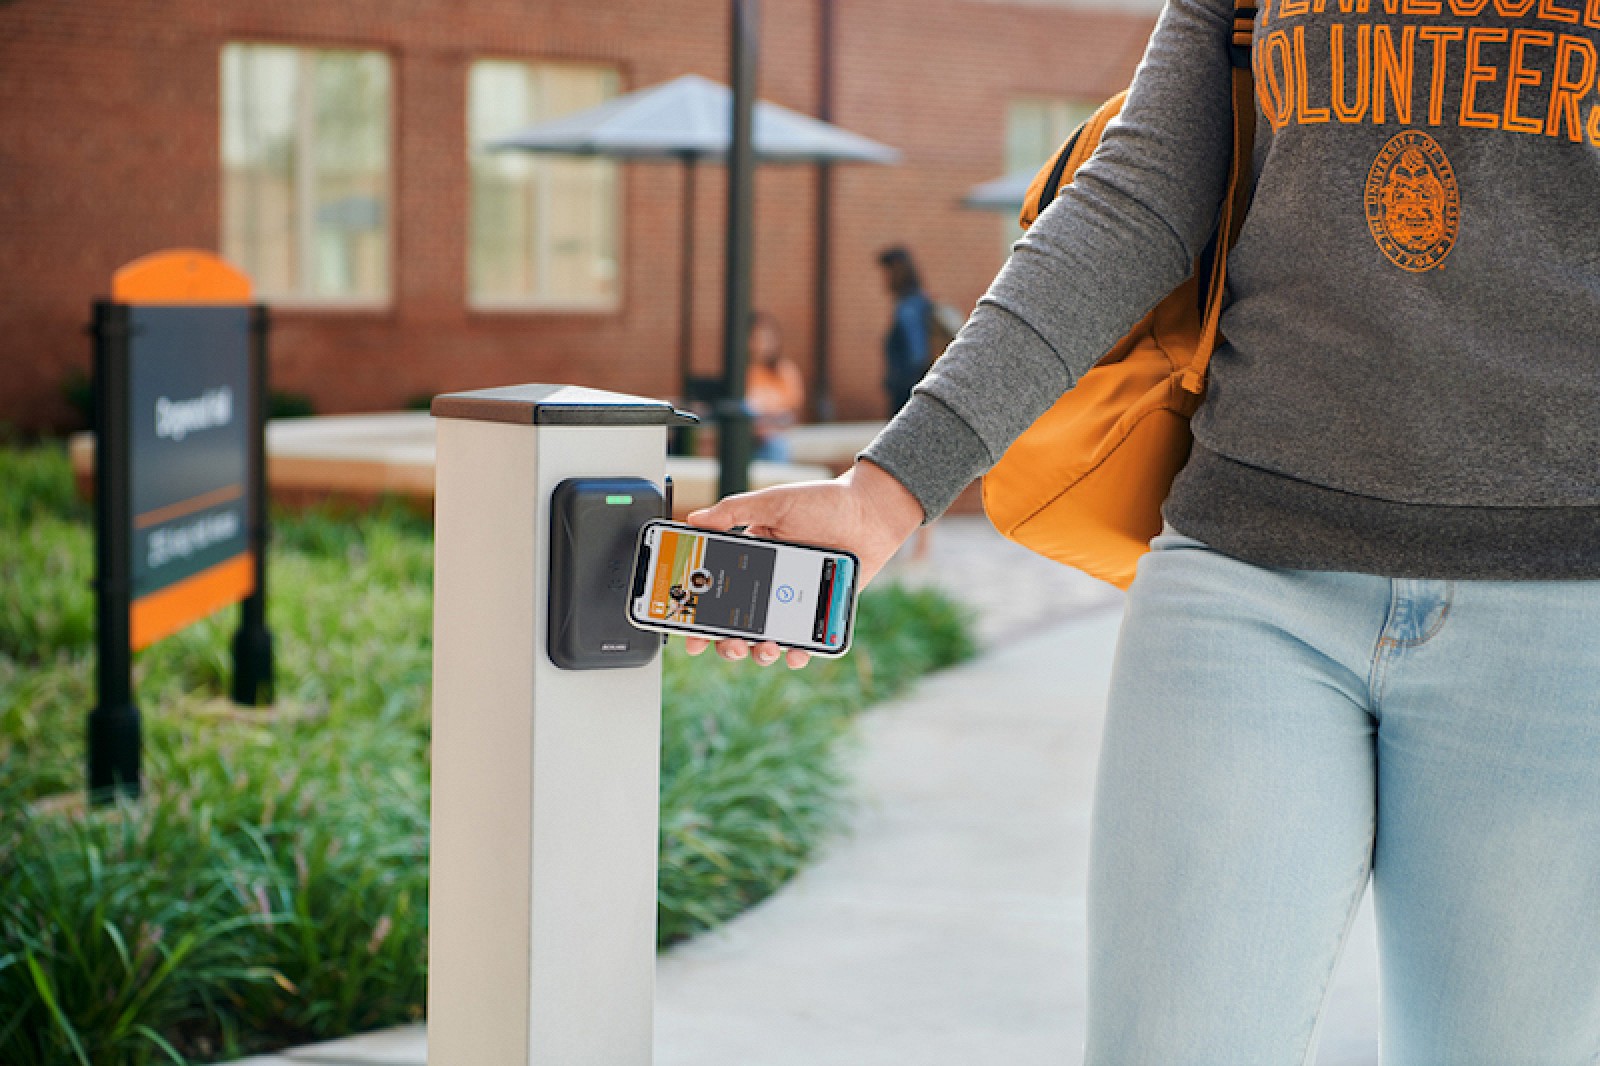 Apple Expanding Contactless Student ID Cards to 12 More Universities in Coming School Year